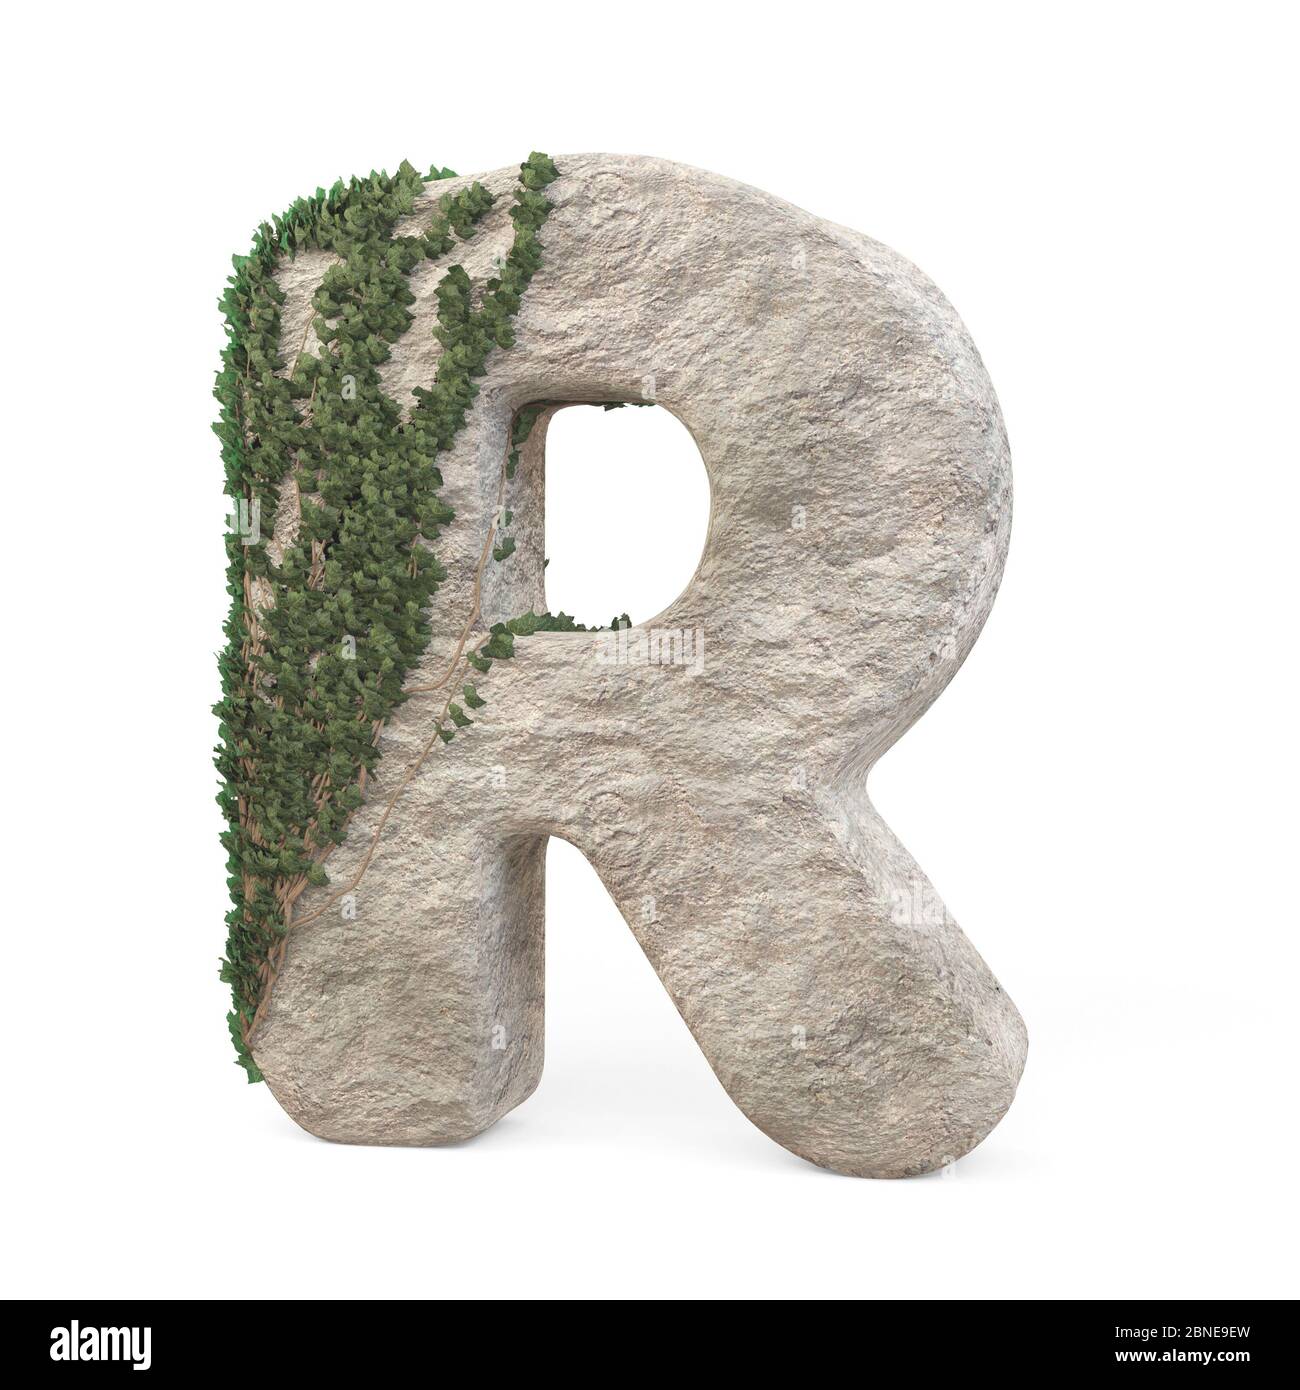 Letters and stones. Каменные буквы. Каменные буквы русские. Каменные буквы 3д. Буква r каменная.